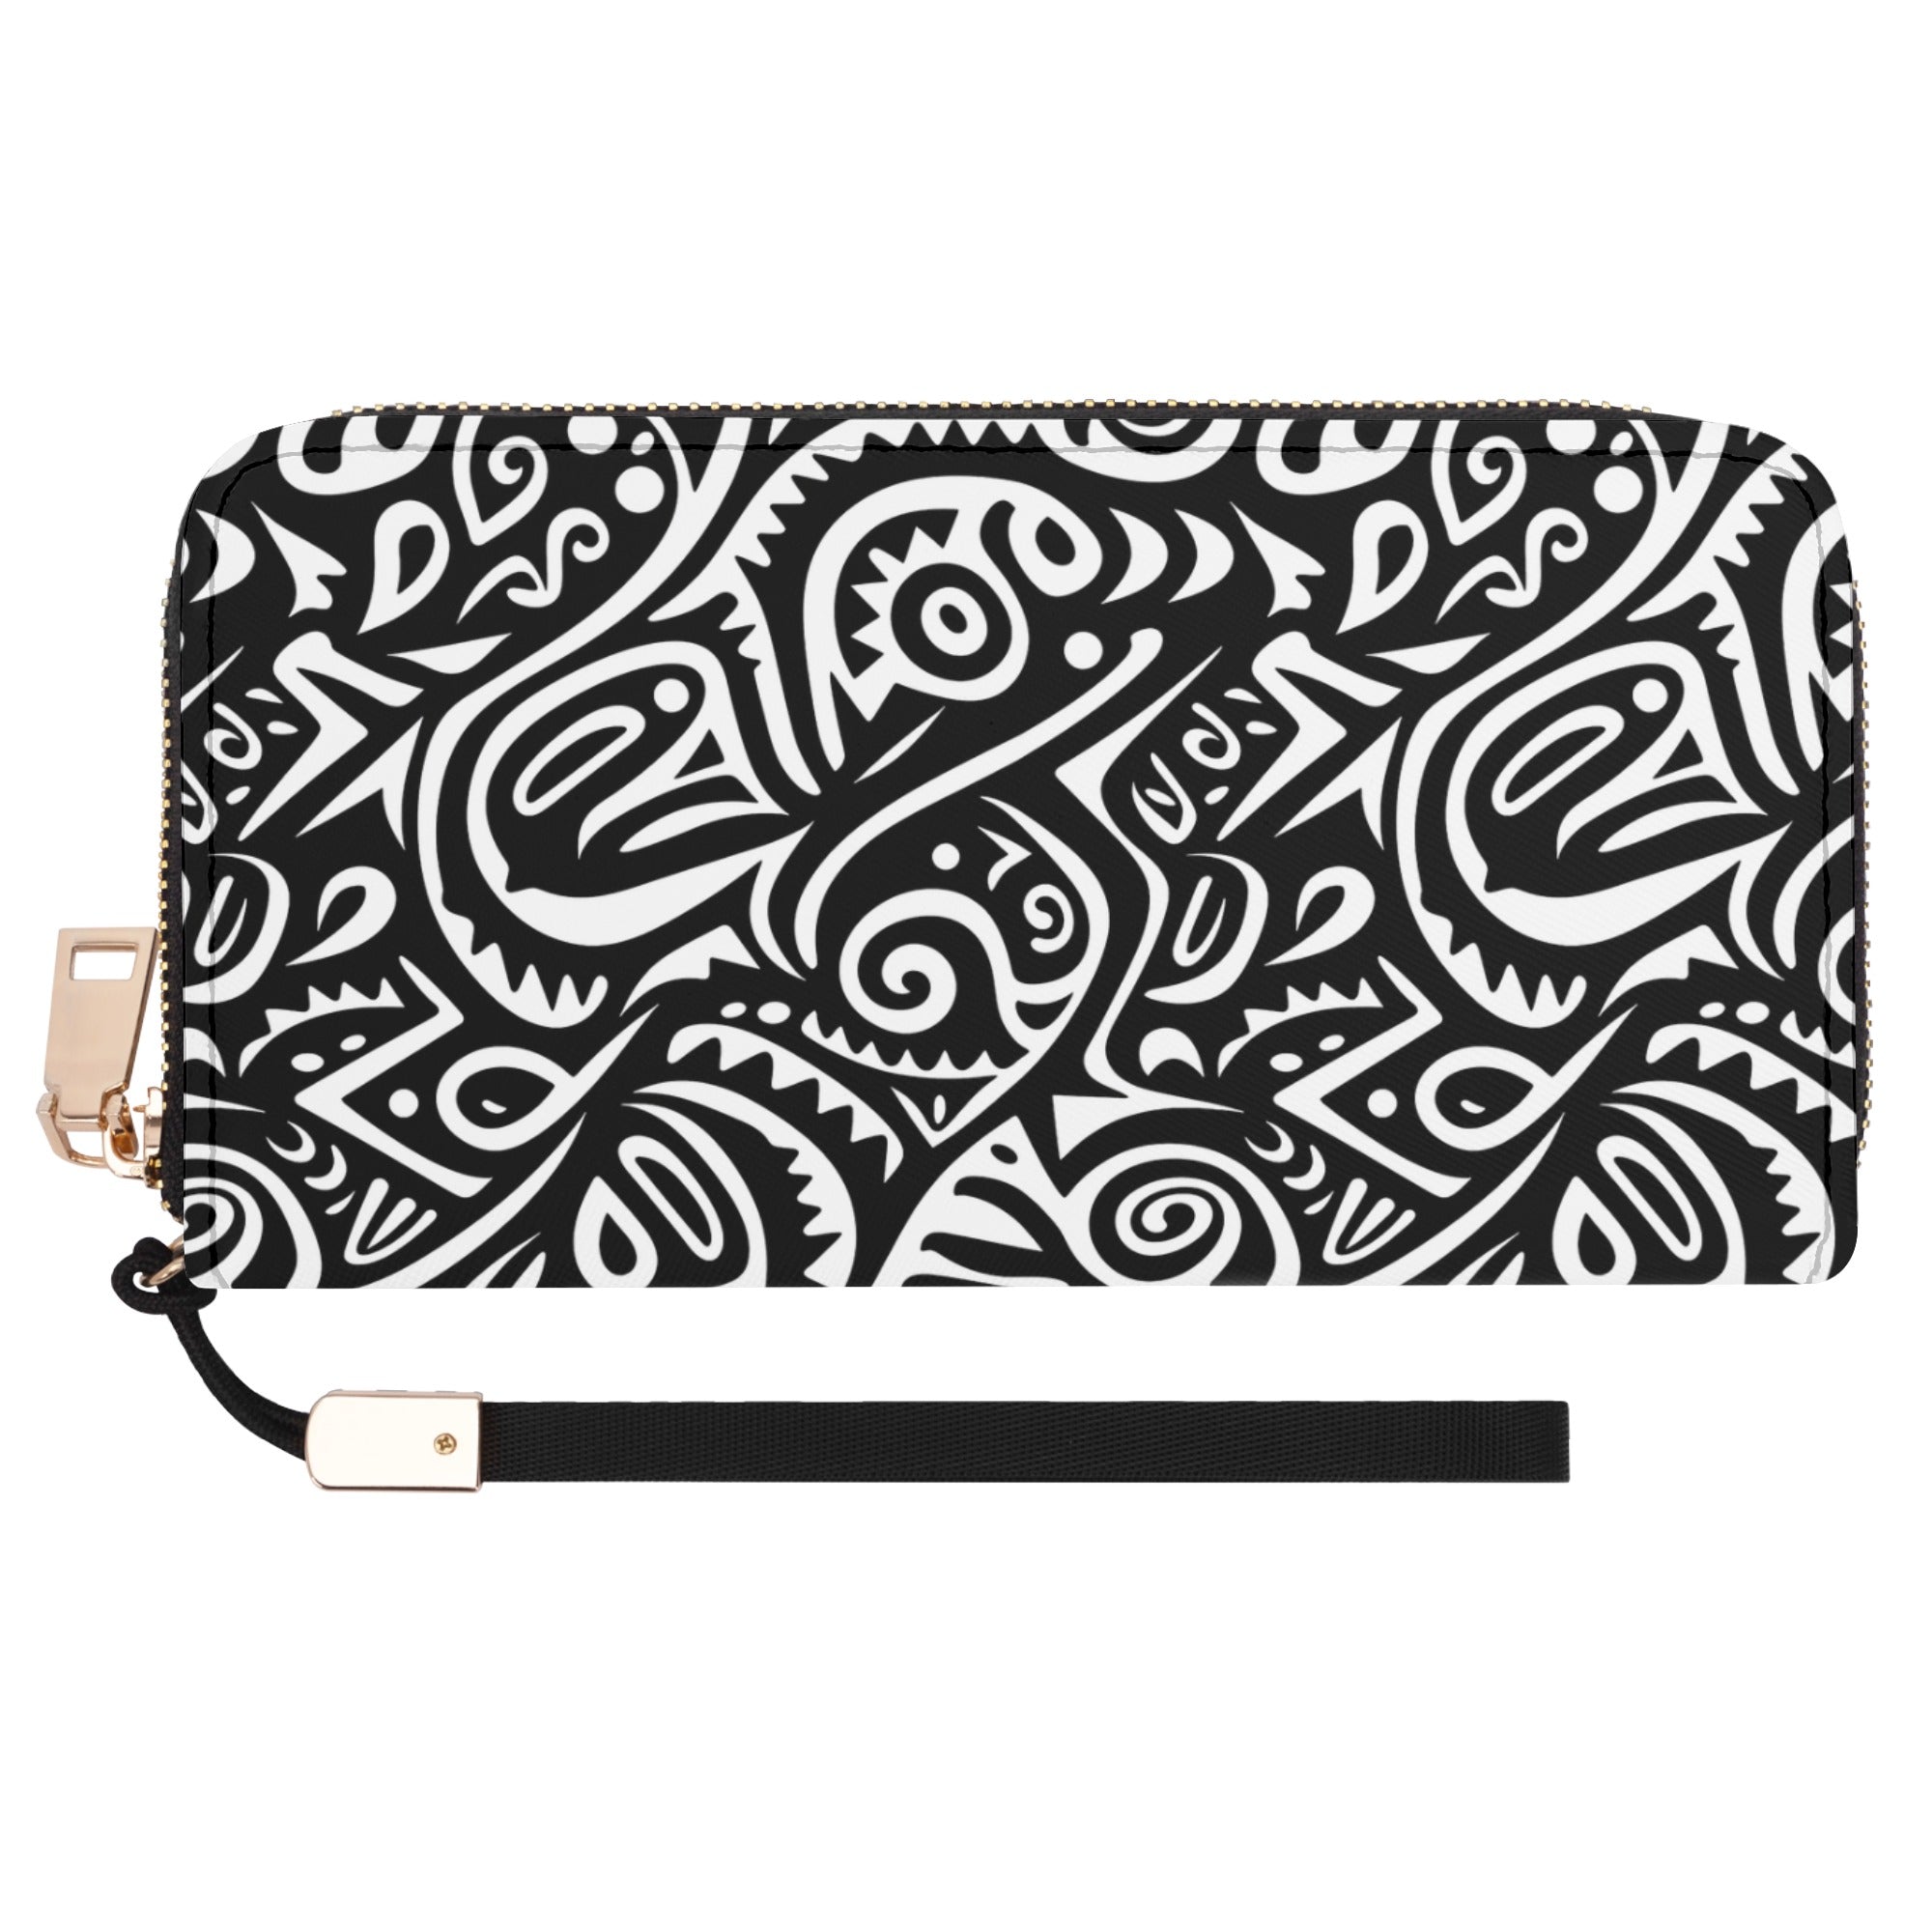 Papuan-Inspired Patterned Art Wallet